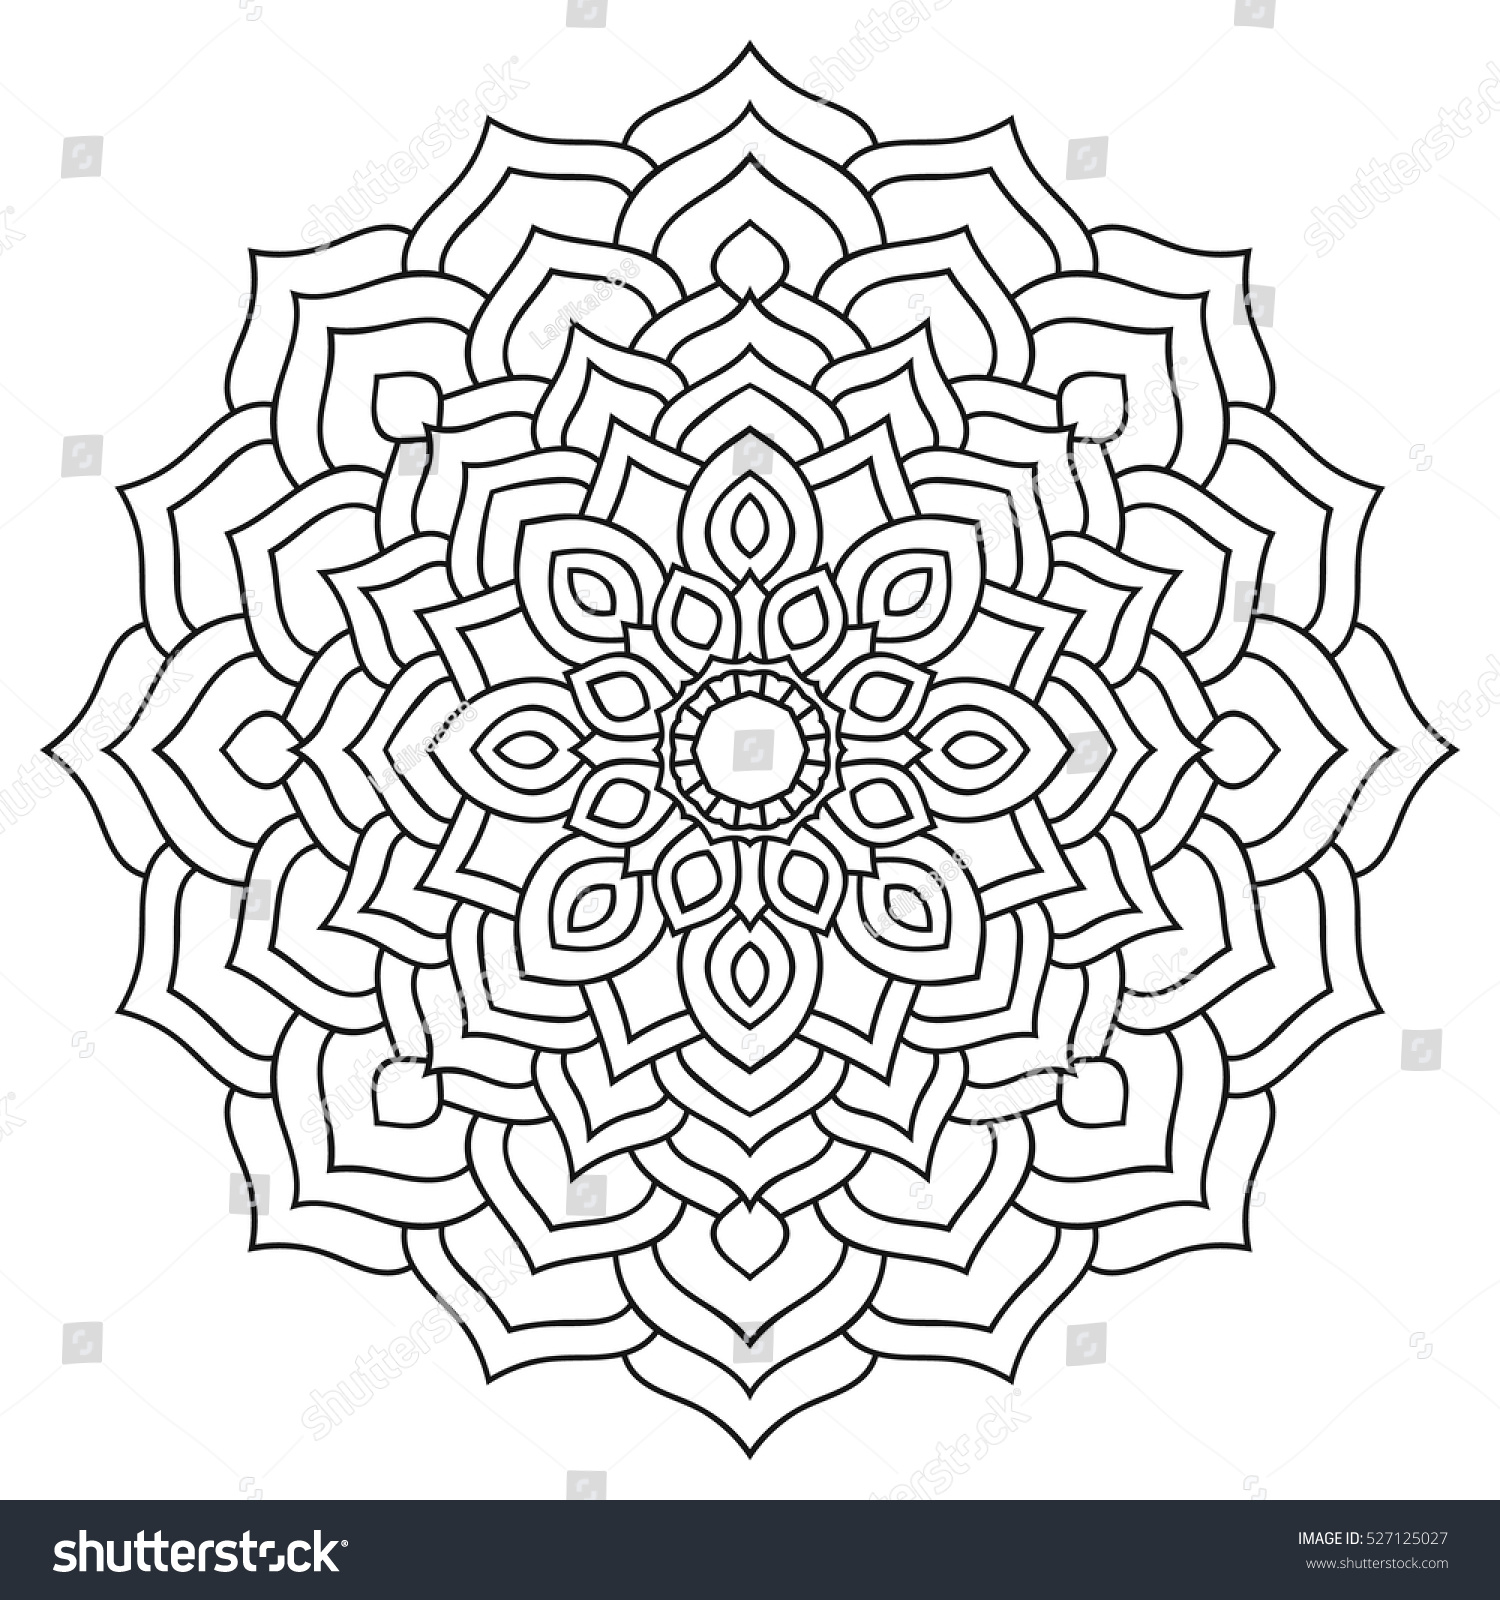 Colouring Symmetrical Patterns / Abstract Vector Design Element, Flower ...